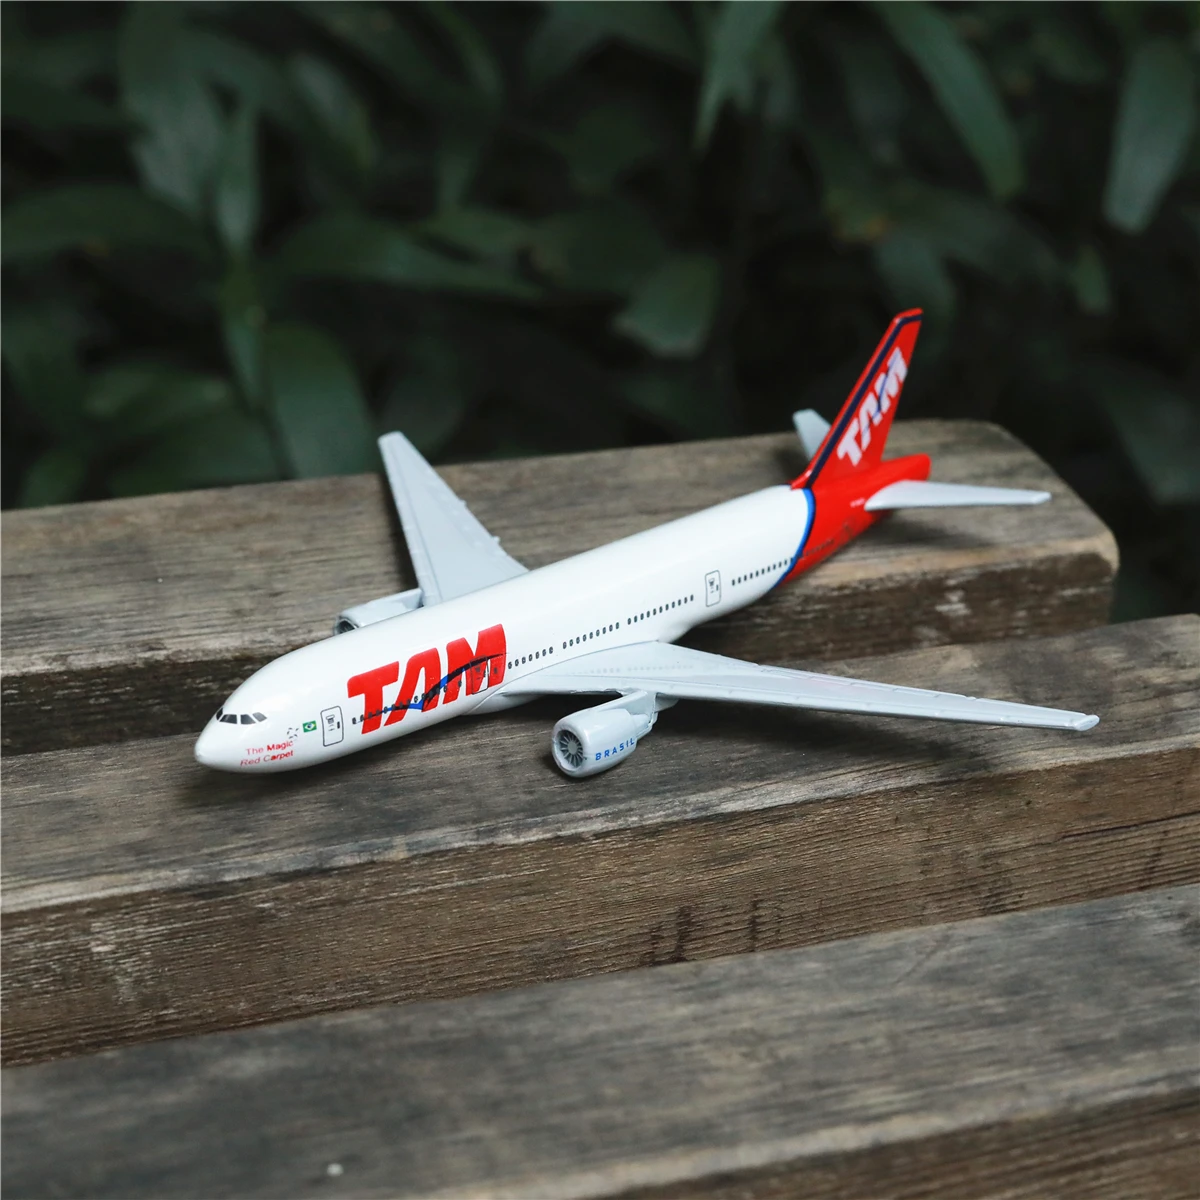 

TAM Airlines Boeing 777 Aircraft Model 6" Metal Airplane Diecast Mini Moto Collection Eduactional Toys for Children